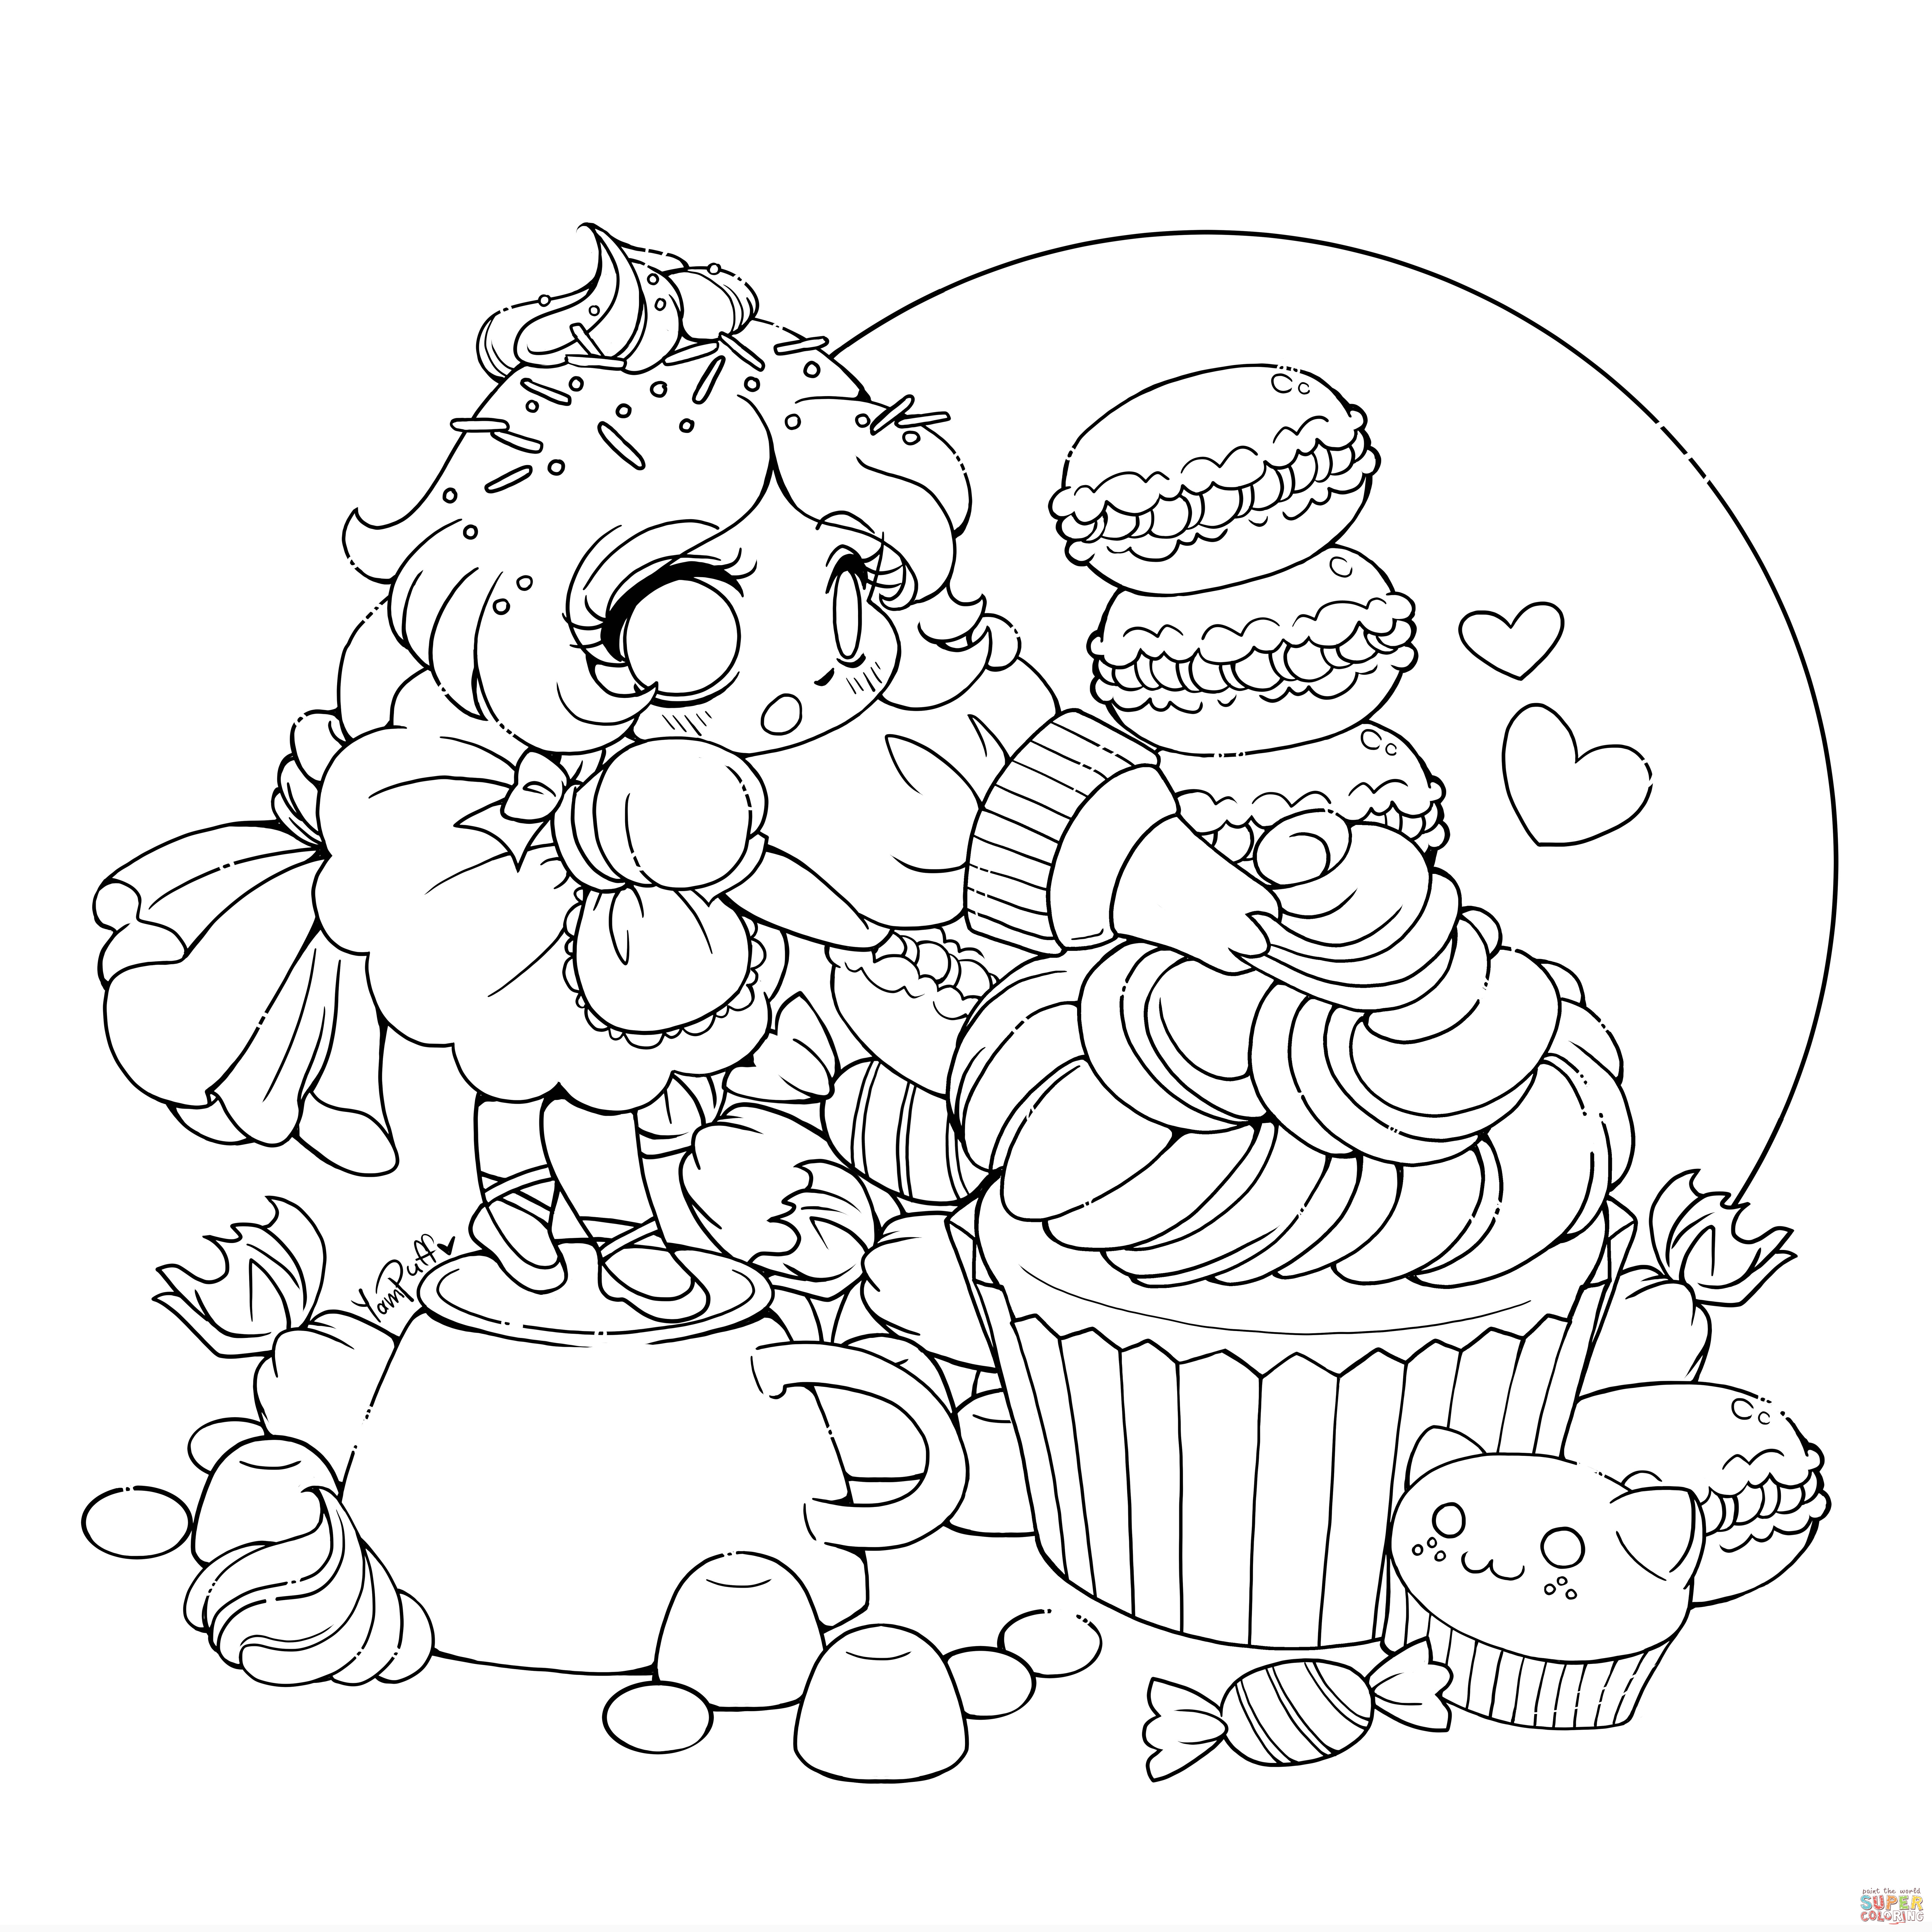 Chibi Anime Girl Coloring Pages
 Anime Girl Coloring Pages coloringsuite